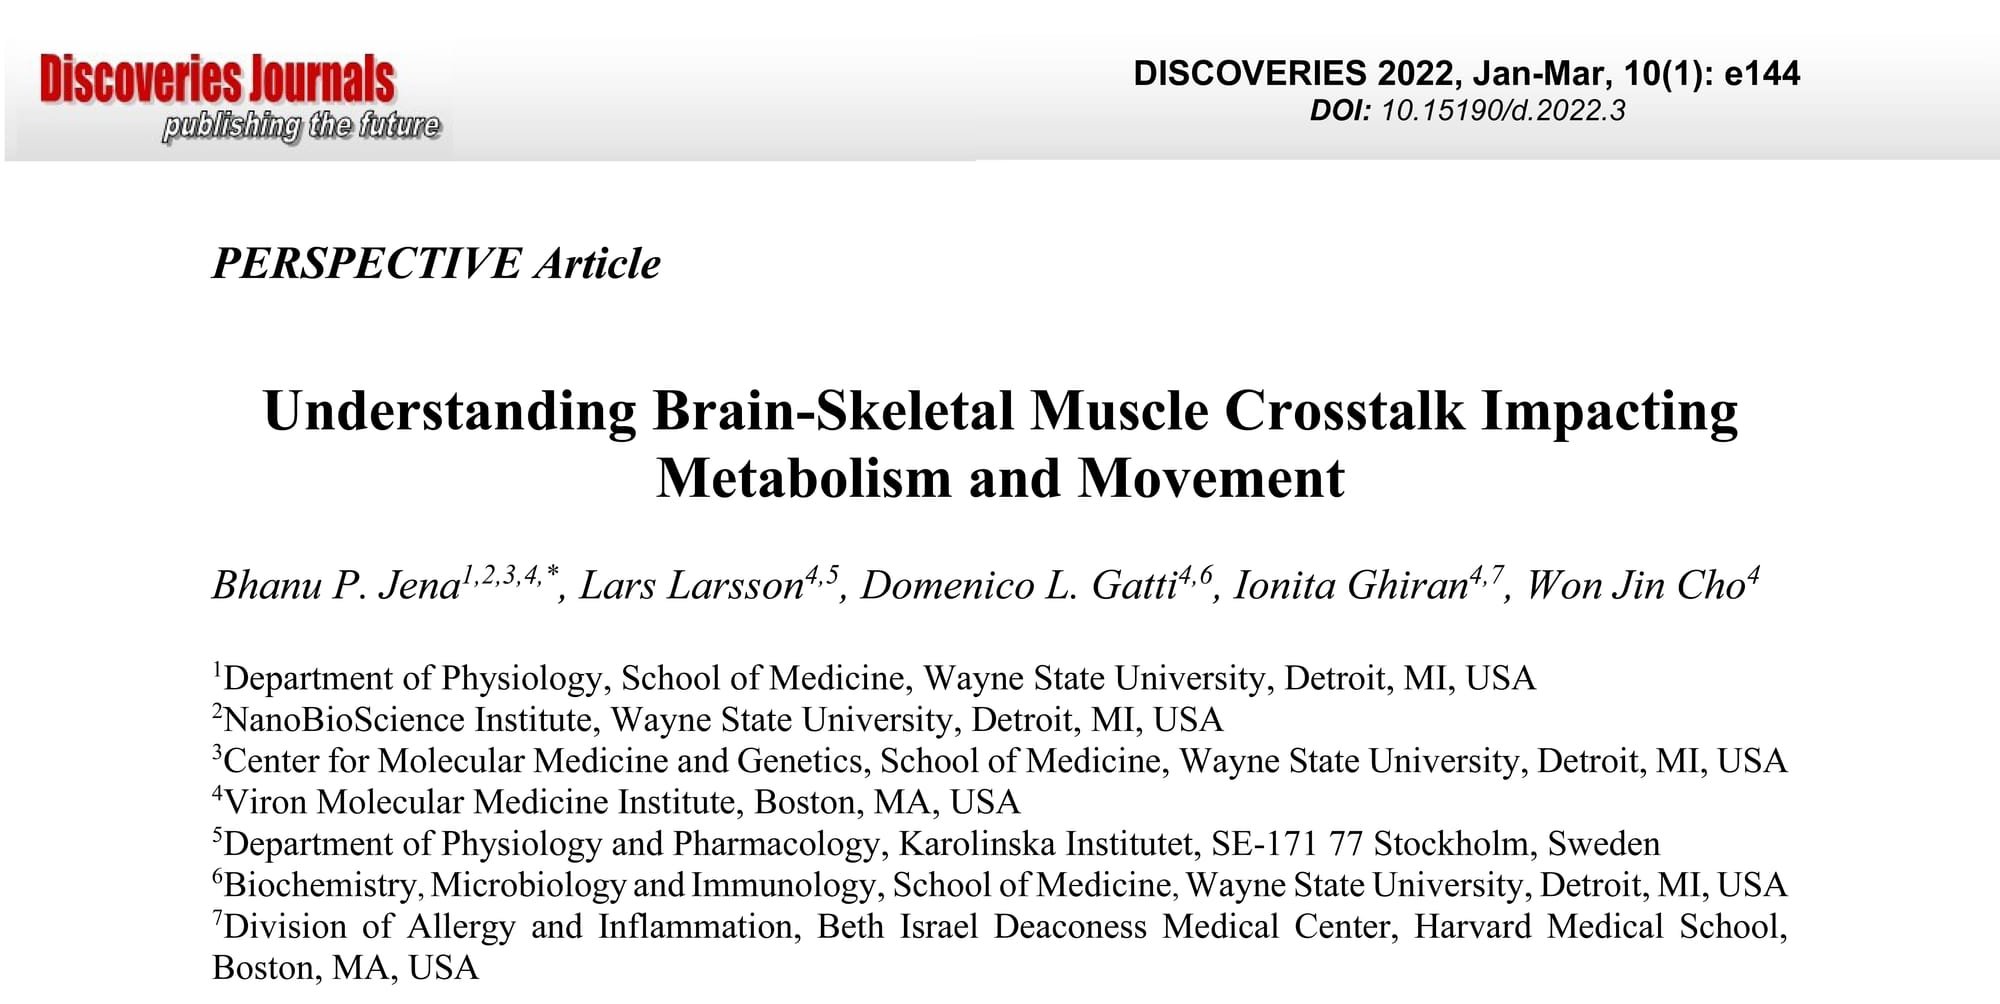 Viron MMI Members Publish Perspective on “Metabolism & Movement”